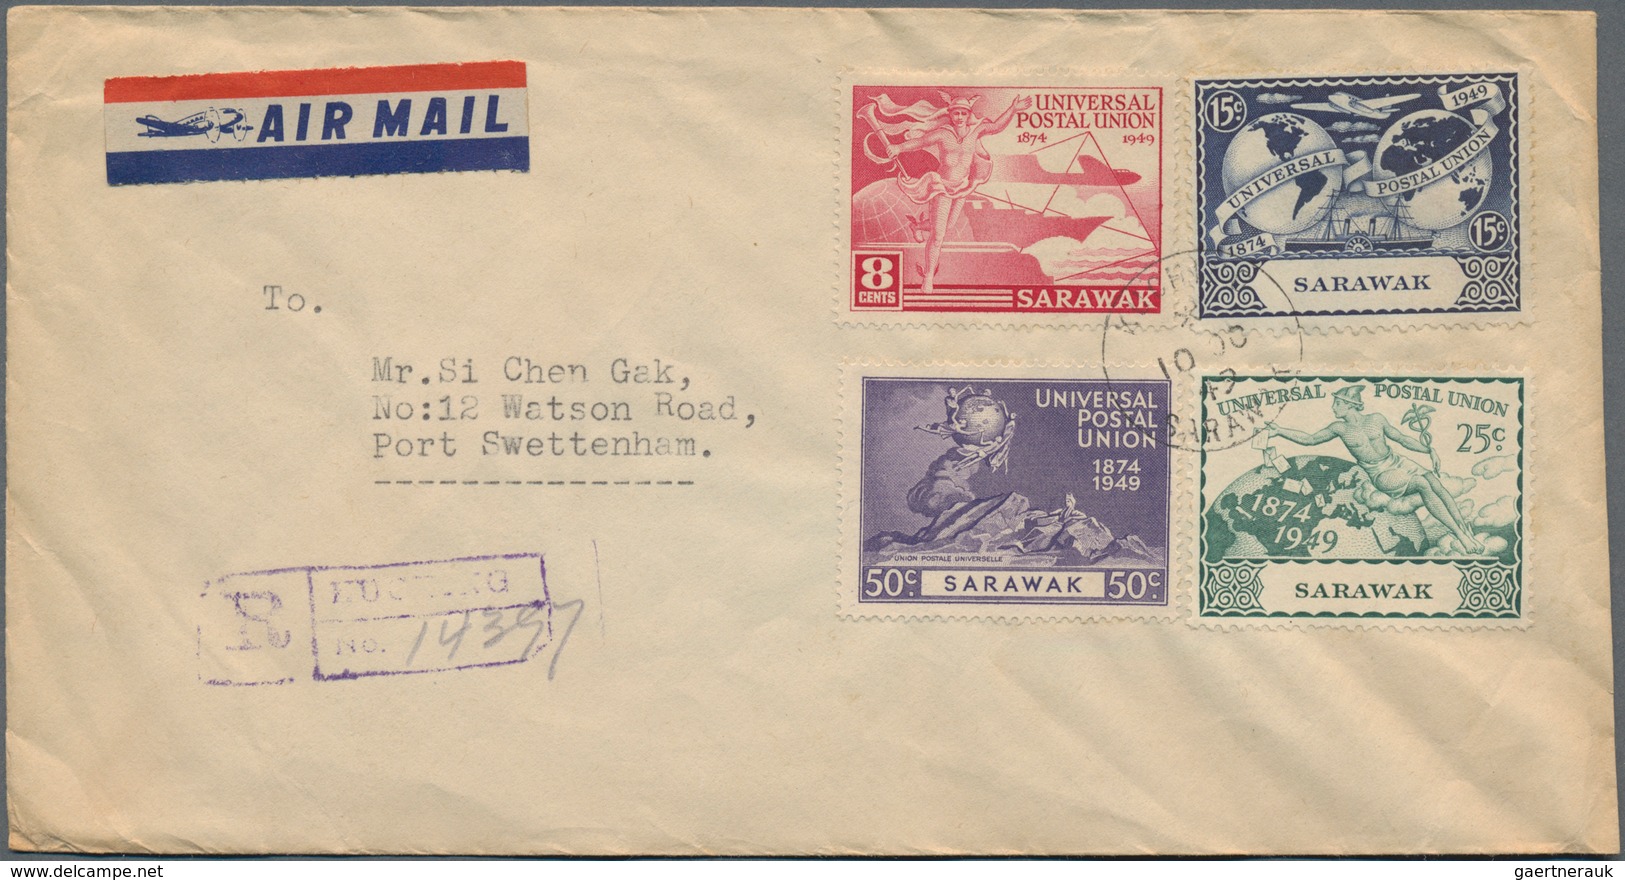 Malaiische Staaten - Sarawak: 1929/48, covers (5) mostly airmail to UK/USA, FDC 1947/53 (5) inc. 1 C